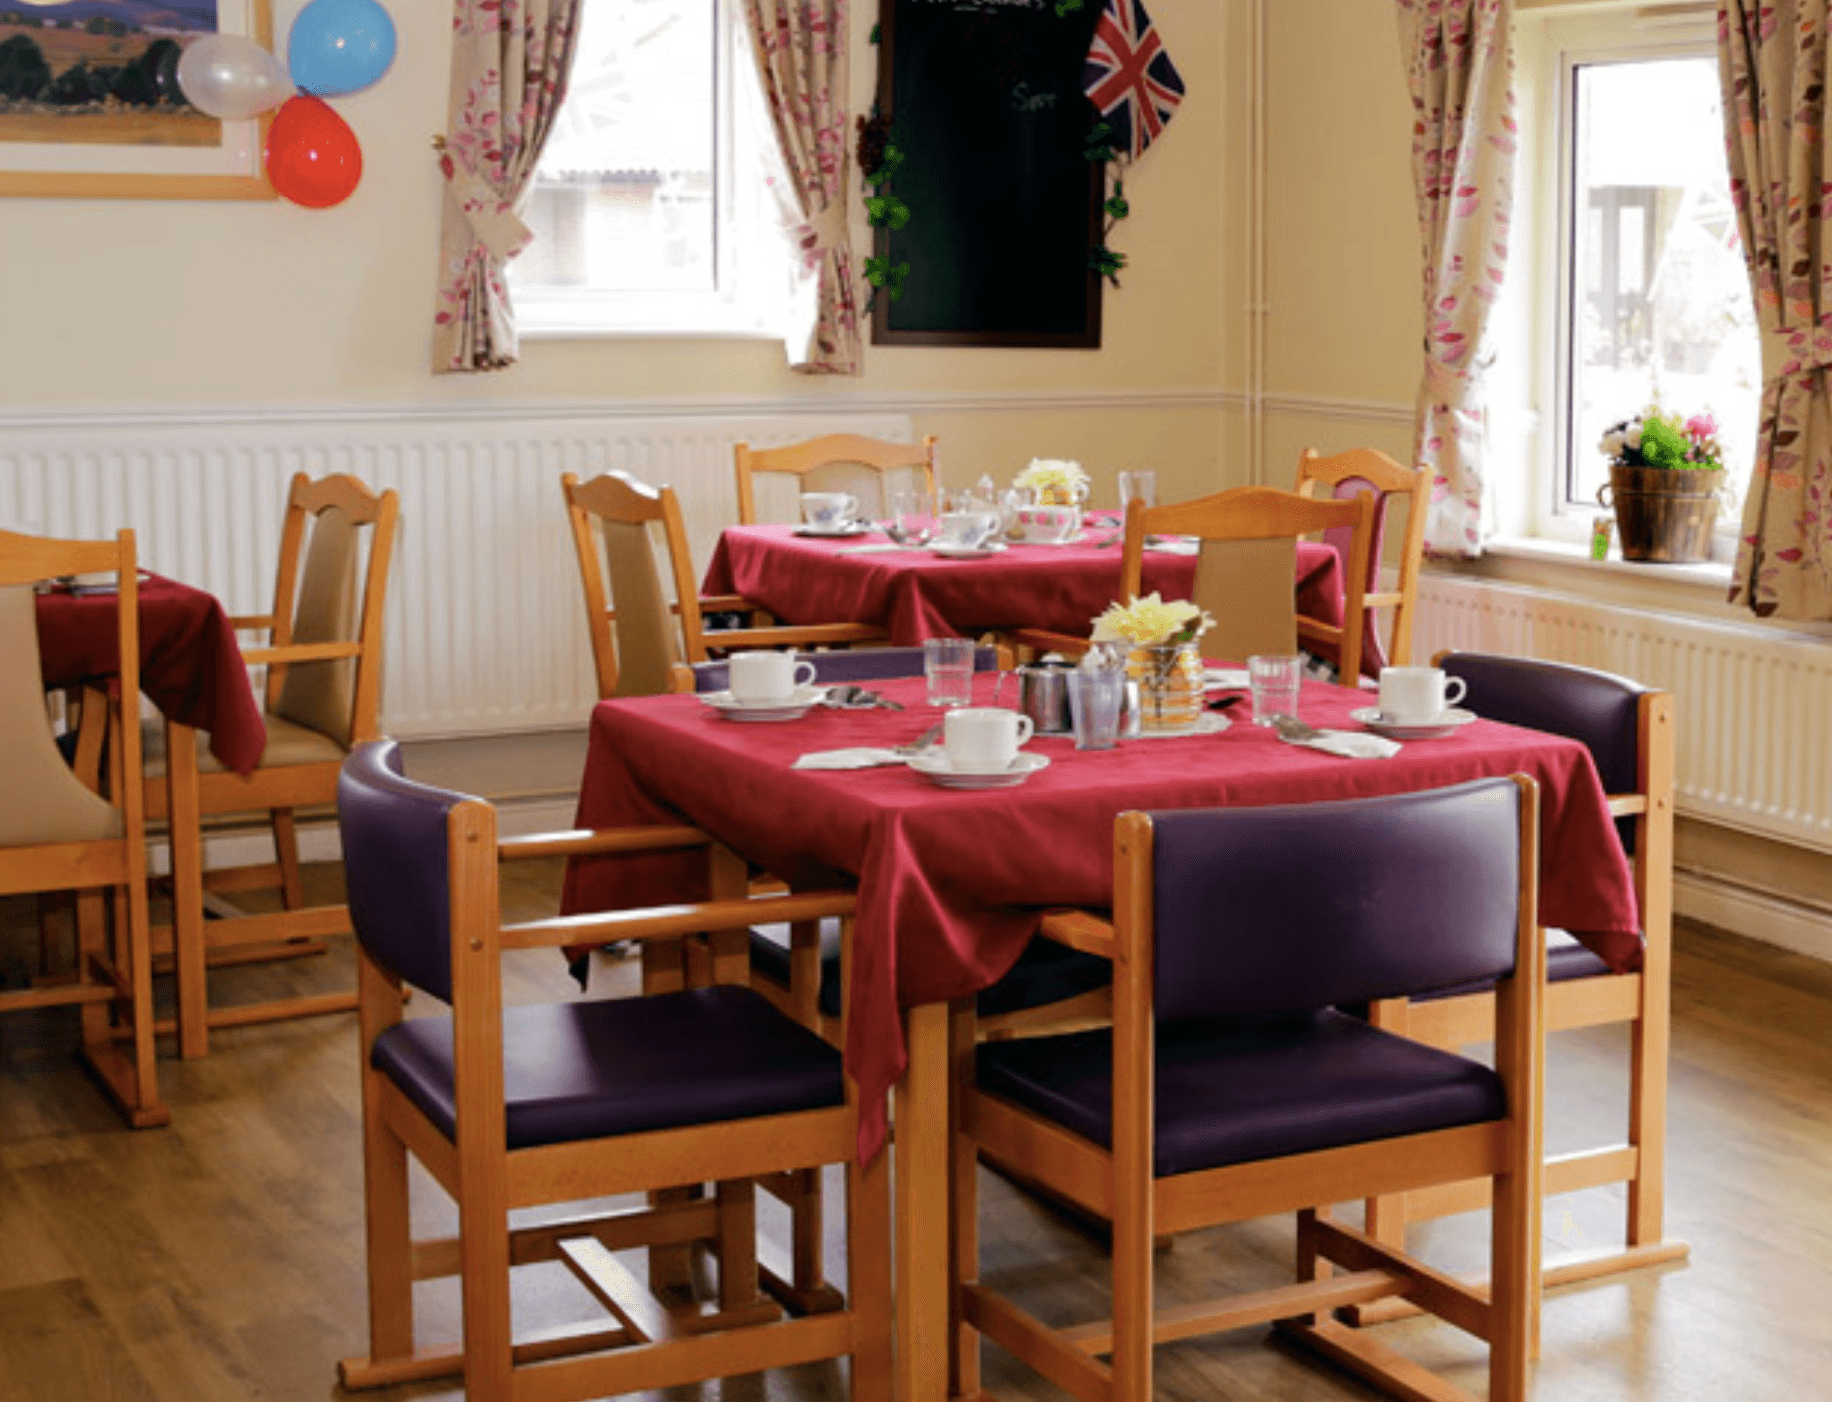 Dining area of Hill View Care Home in Clydebank,Scotland